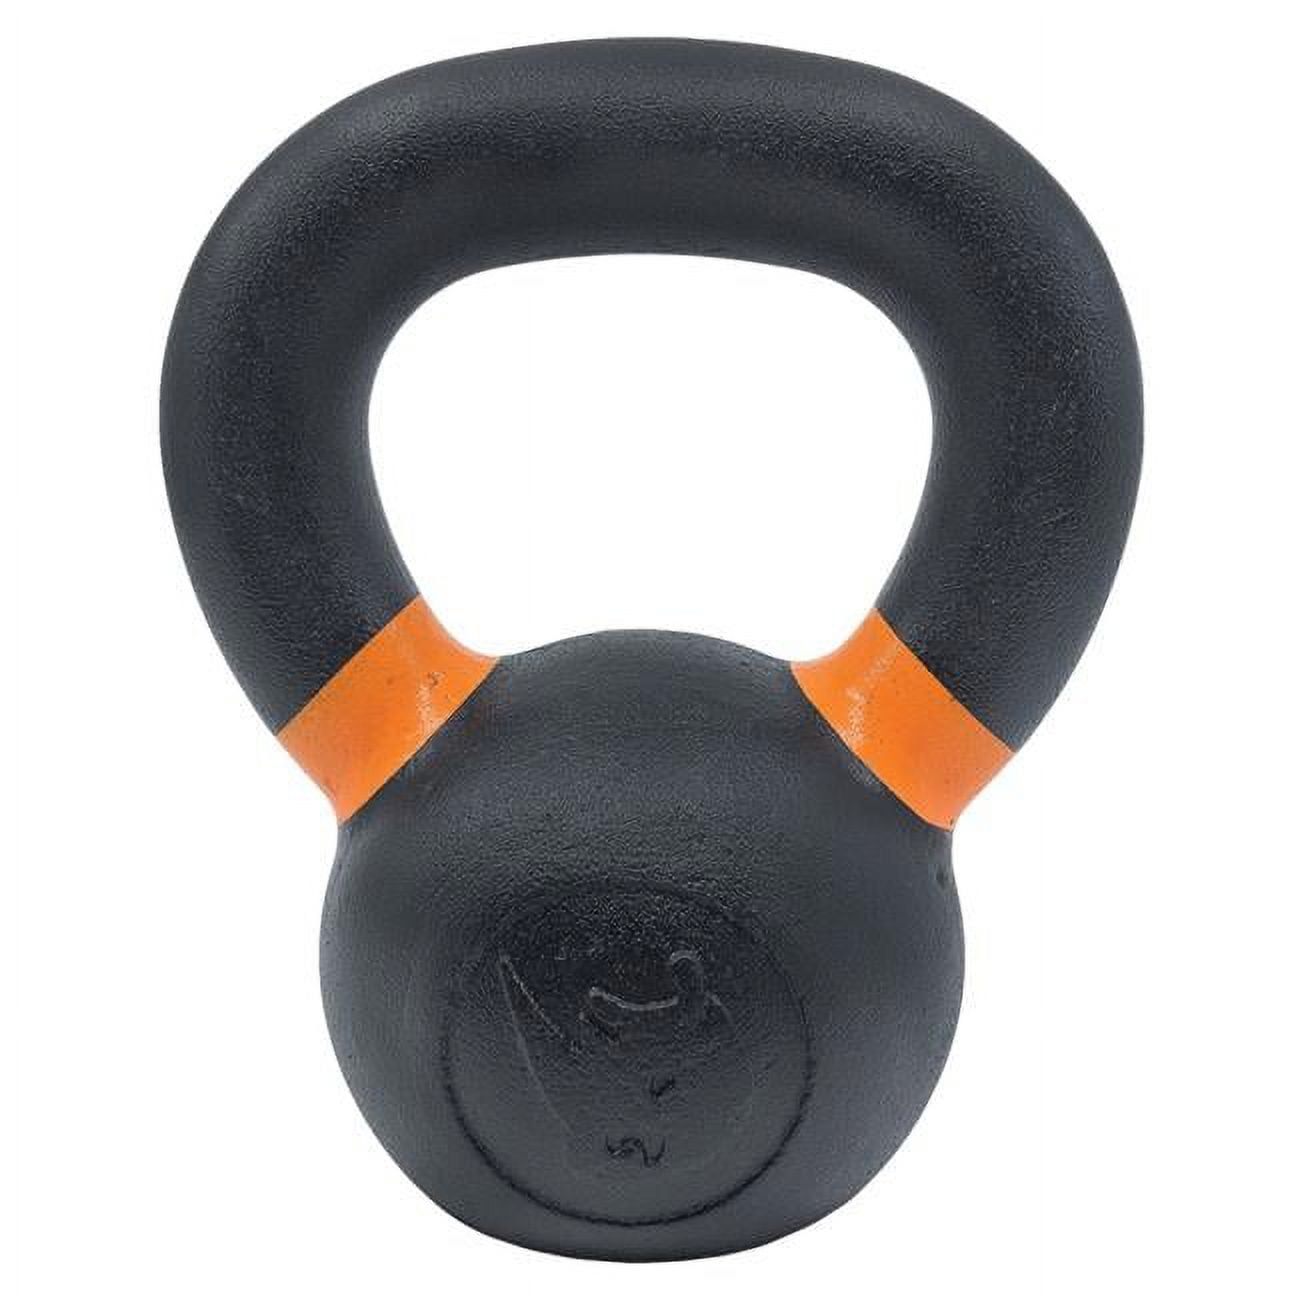 Picture of Champion Sports PCK10 5 x 3 x 6 in. 10 lbs Iron Kettlebell with Orange Handles